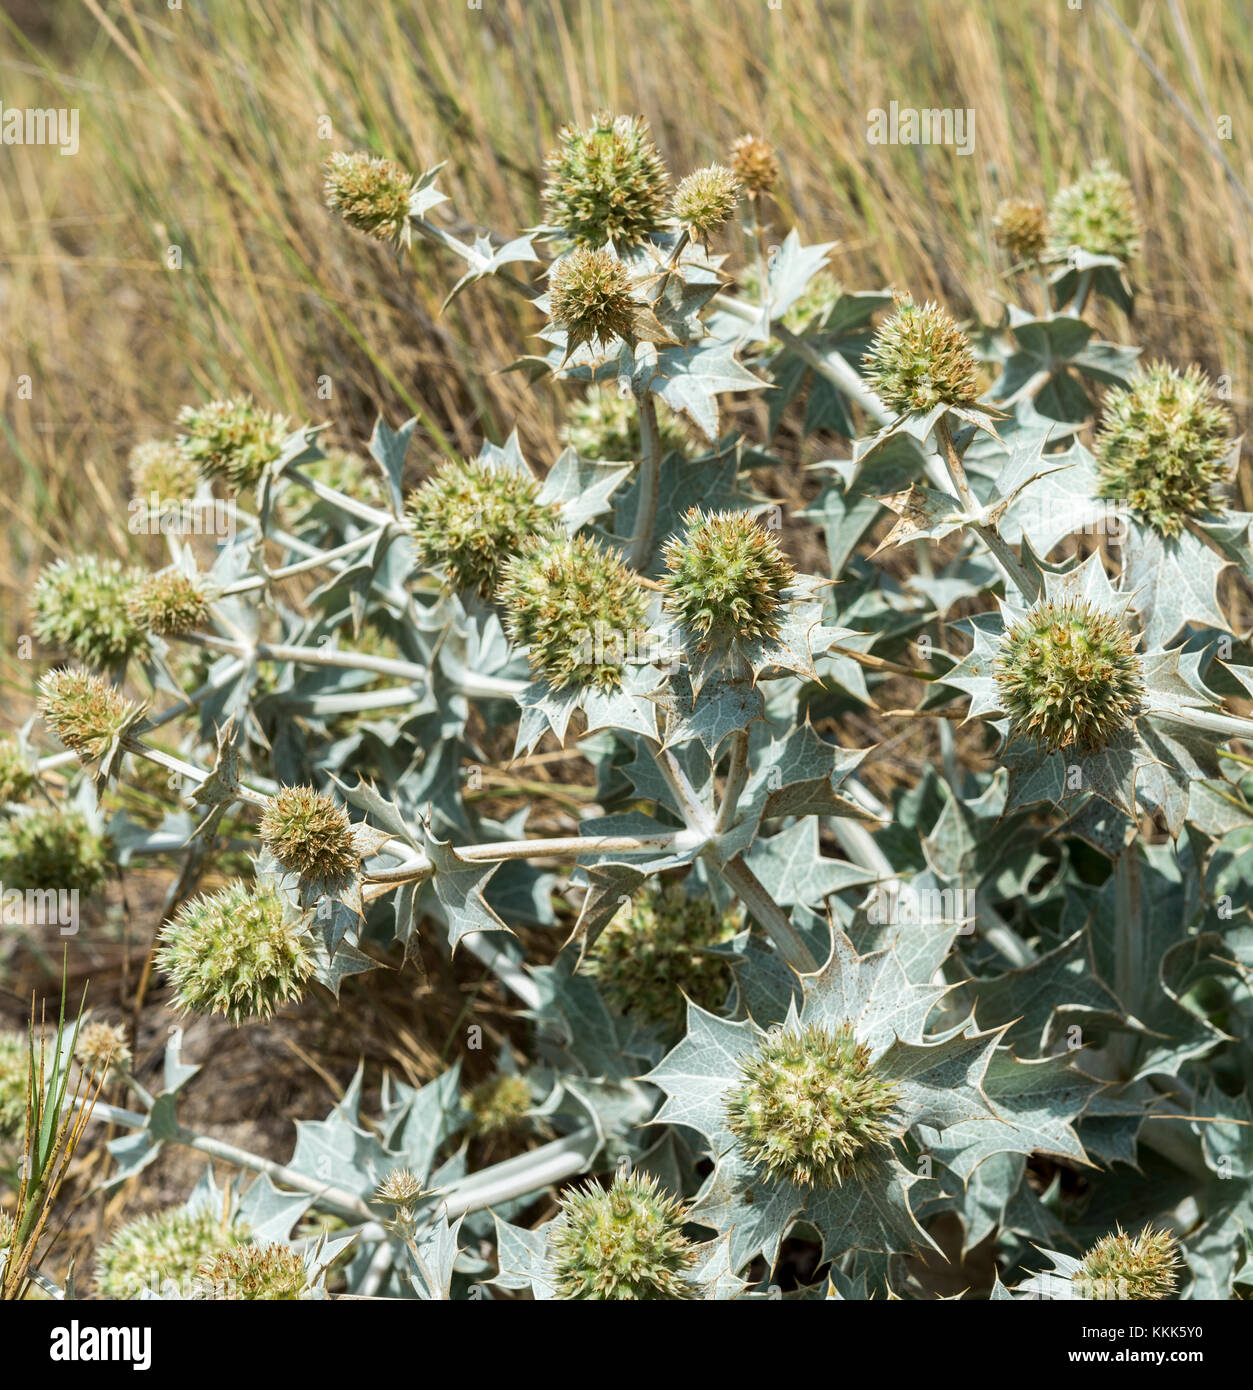 Close-up of Sea Holly, Eryngium maritimum, growing on the dunes. It is a species in the Apiaceae family native to most European coastlines. Stock Photo